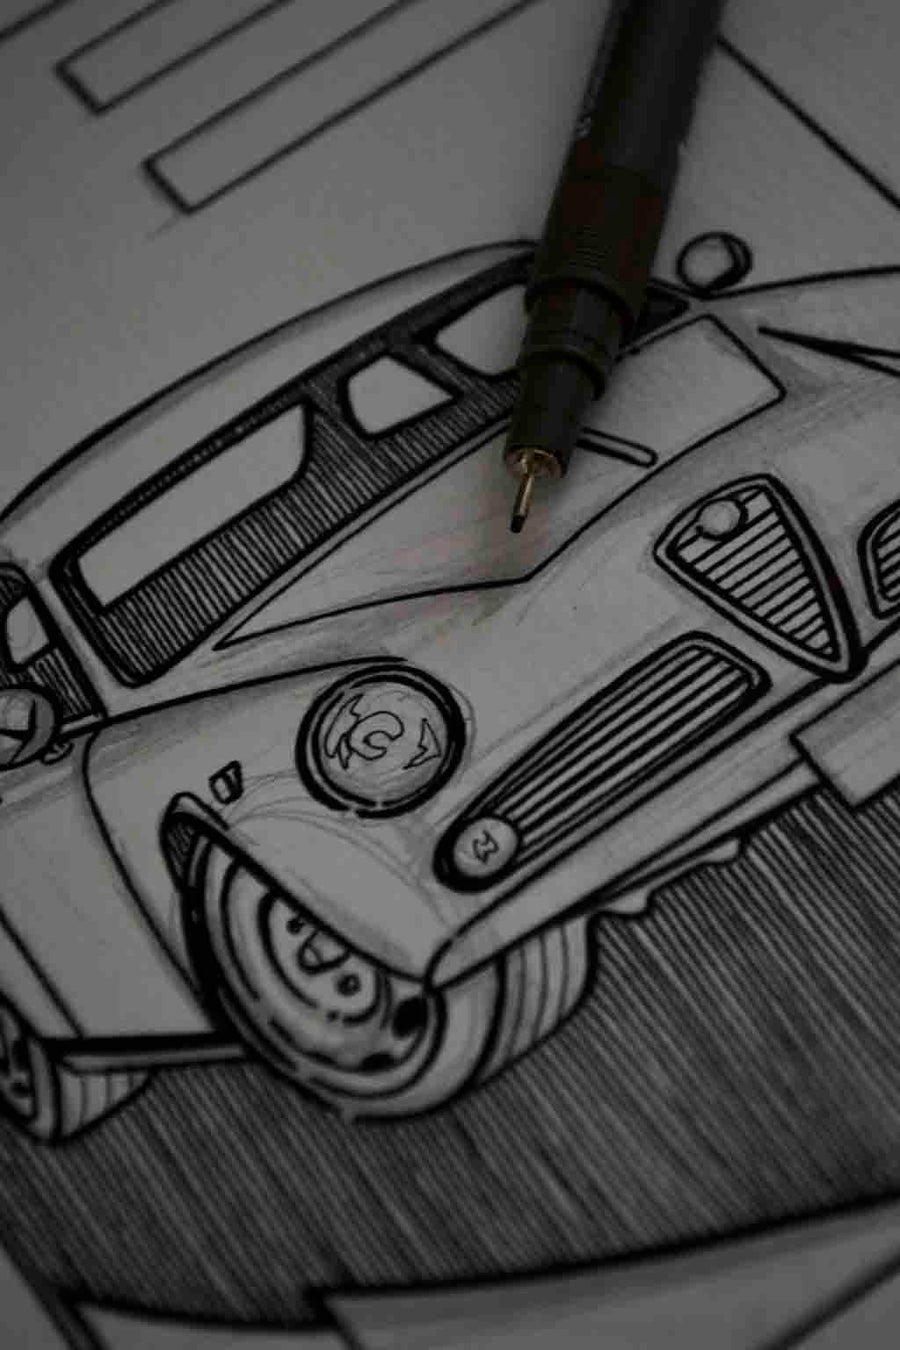 Inspiration from @alfagsv10106 /ALFA ROMEO GSV Handmade Artwork and Coloring Pages (Option Puzzle)